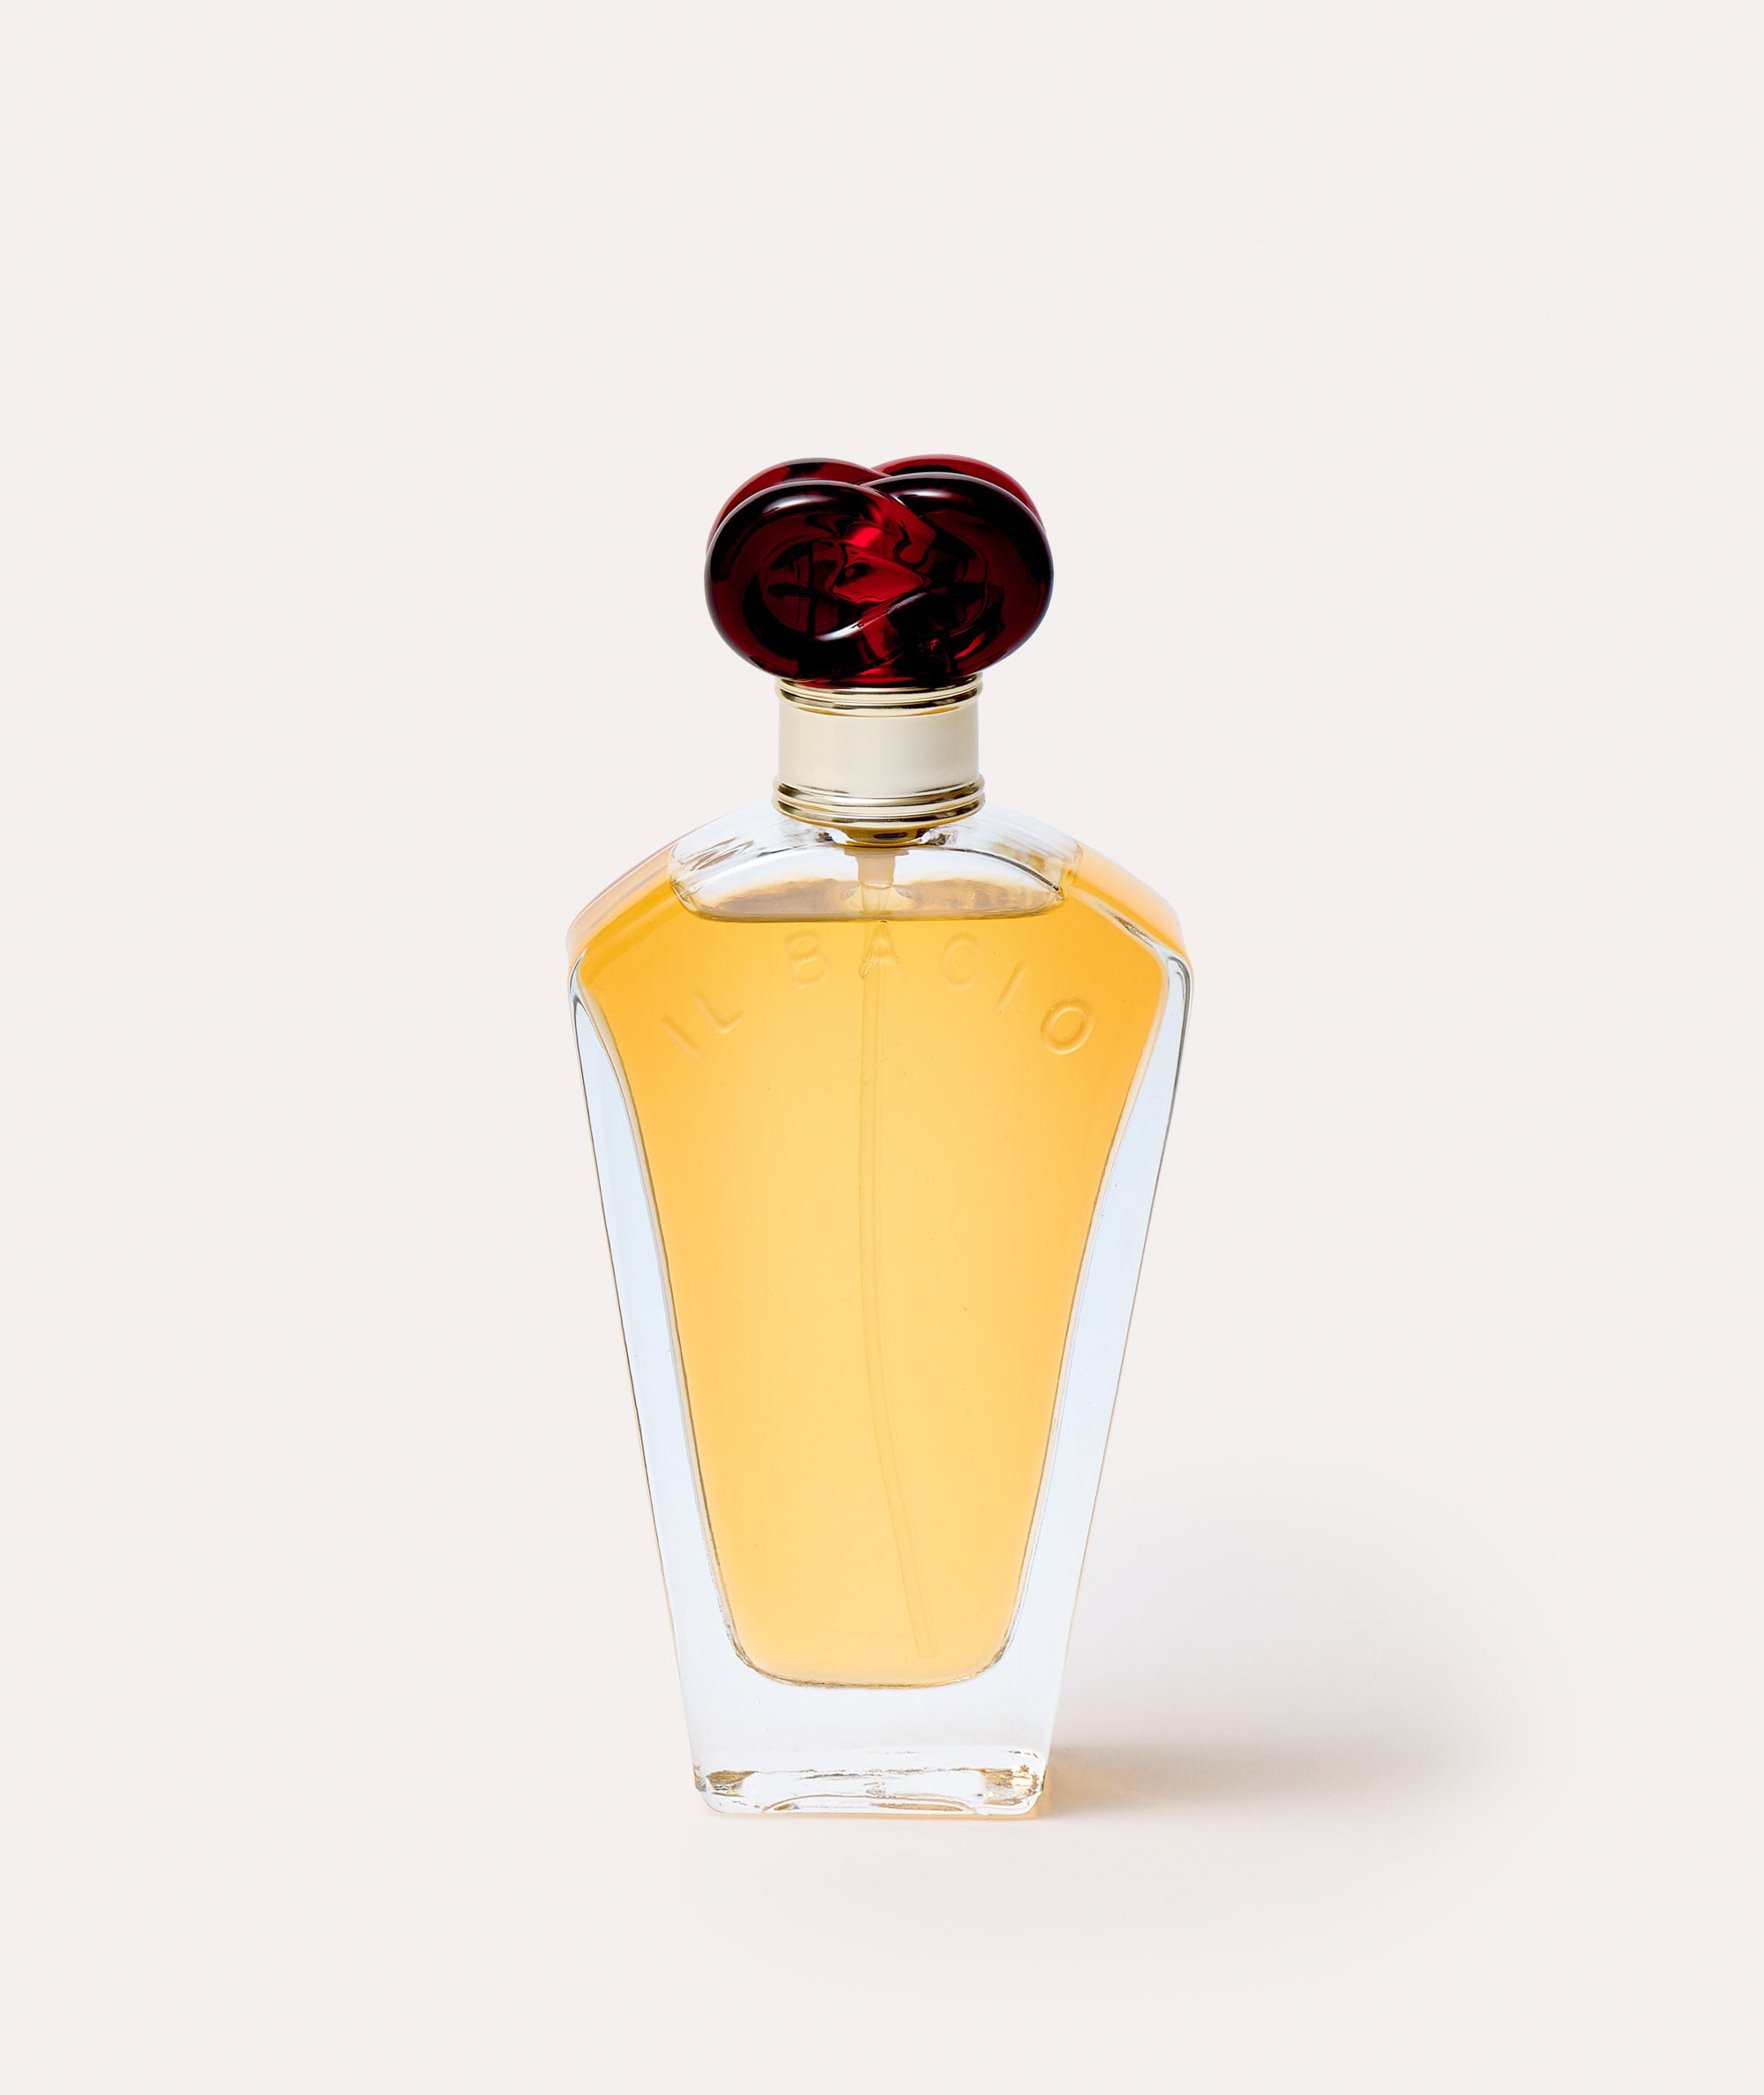 This is a picture of Borghese Il Bacio Eau De Parfum Spray in a bottle with a red cap